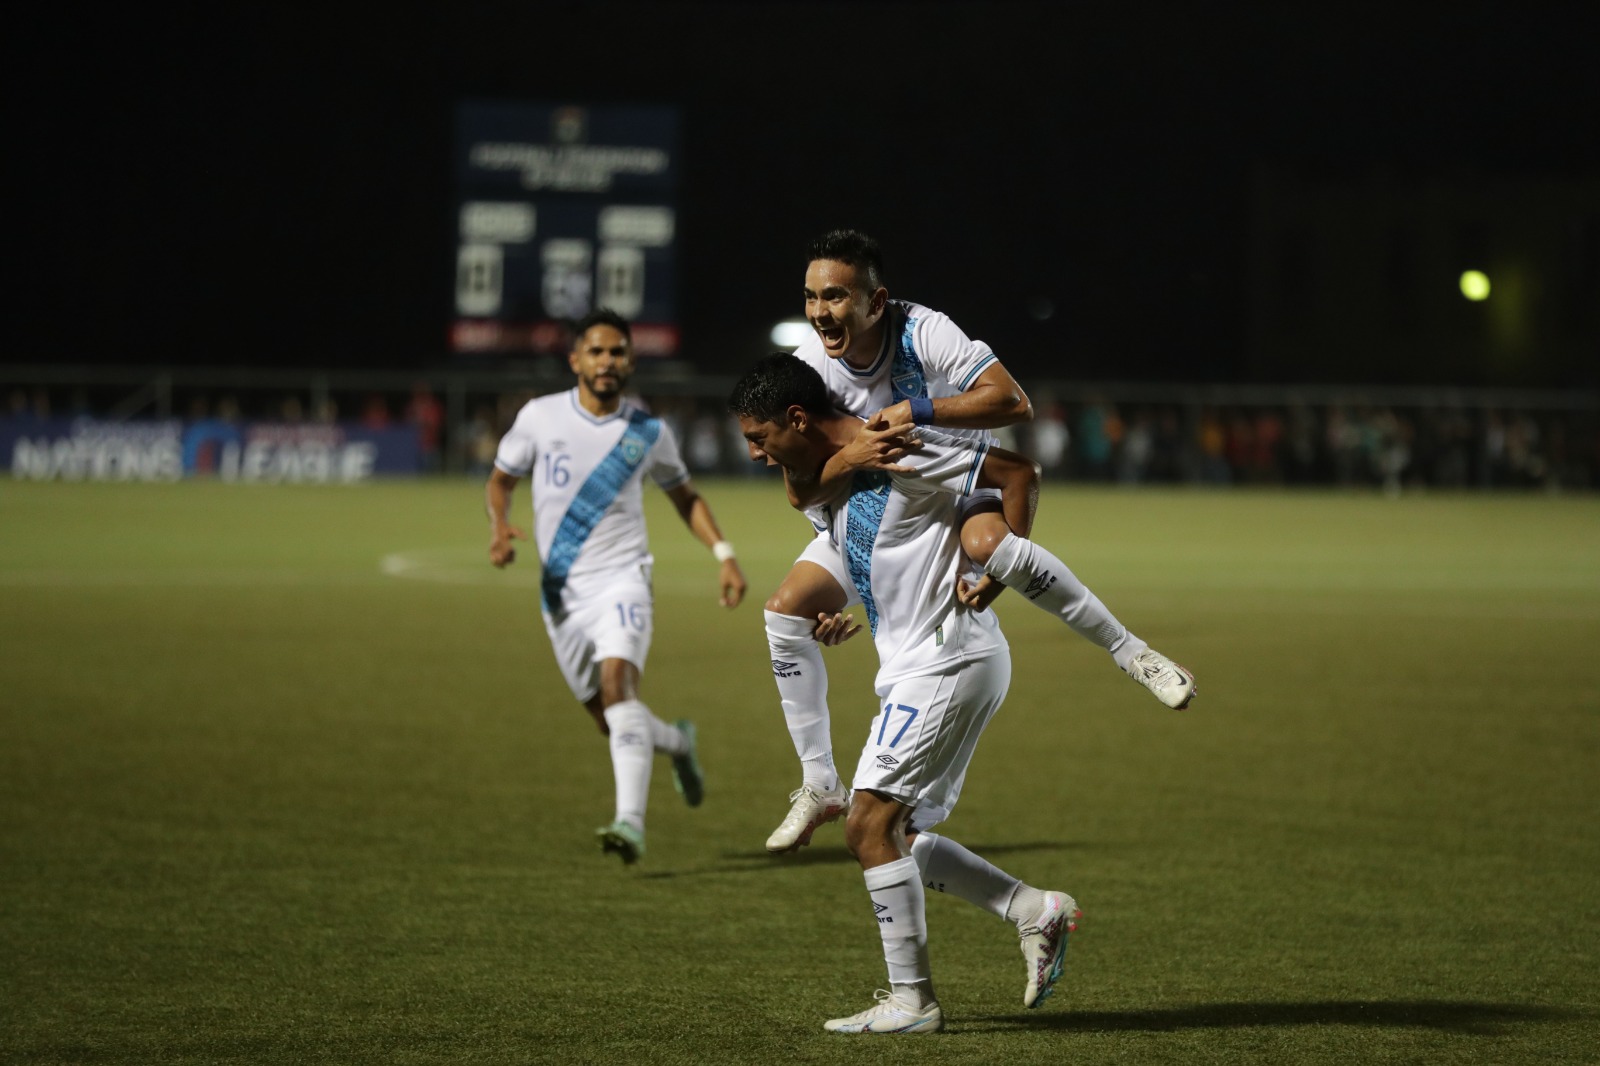 Guatemala settles in Belize: Santis’ best goal, Hagen’s mistake and referee’s controversial decision on Baikal penalty